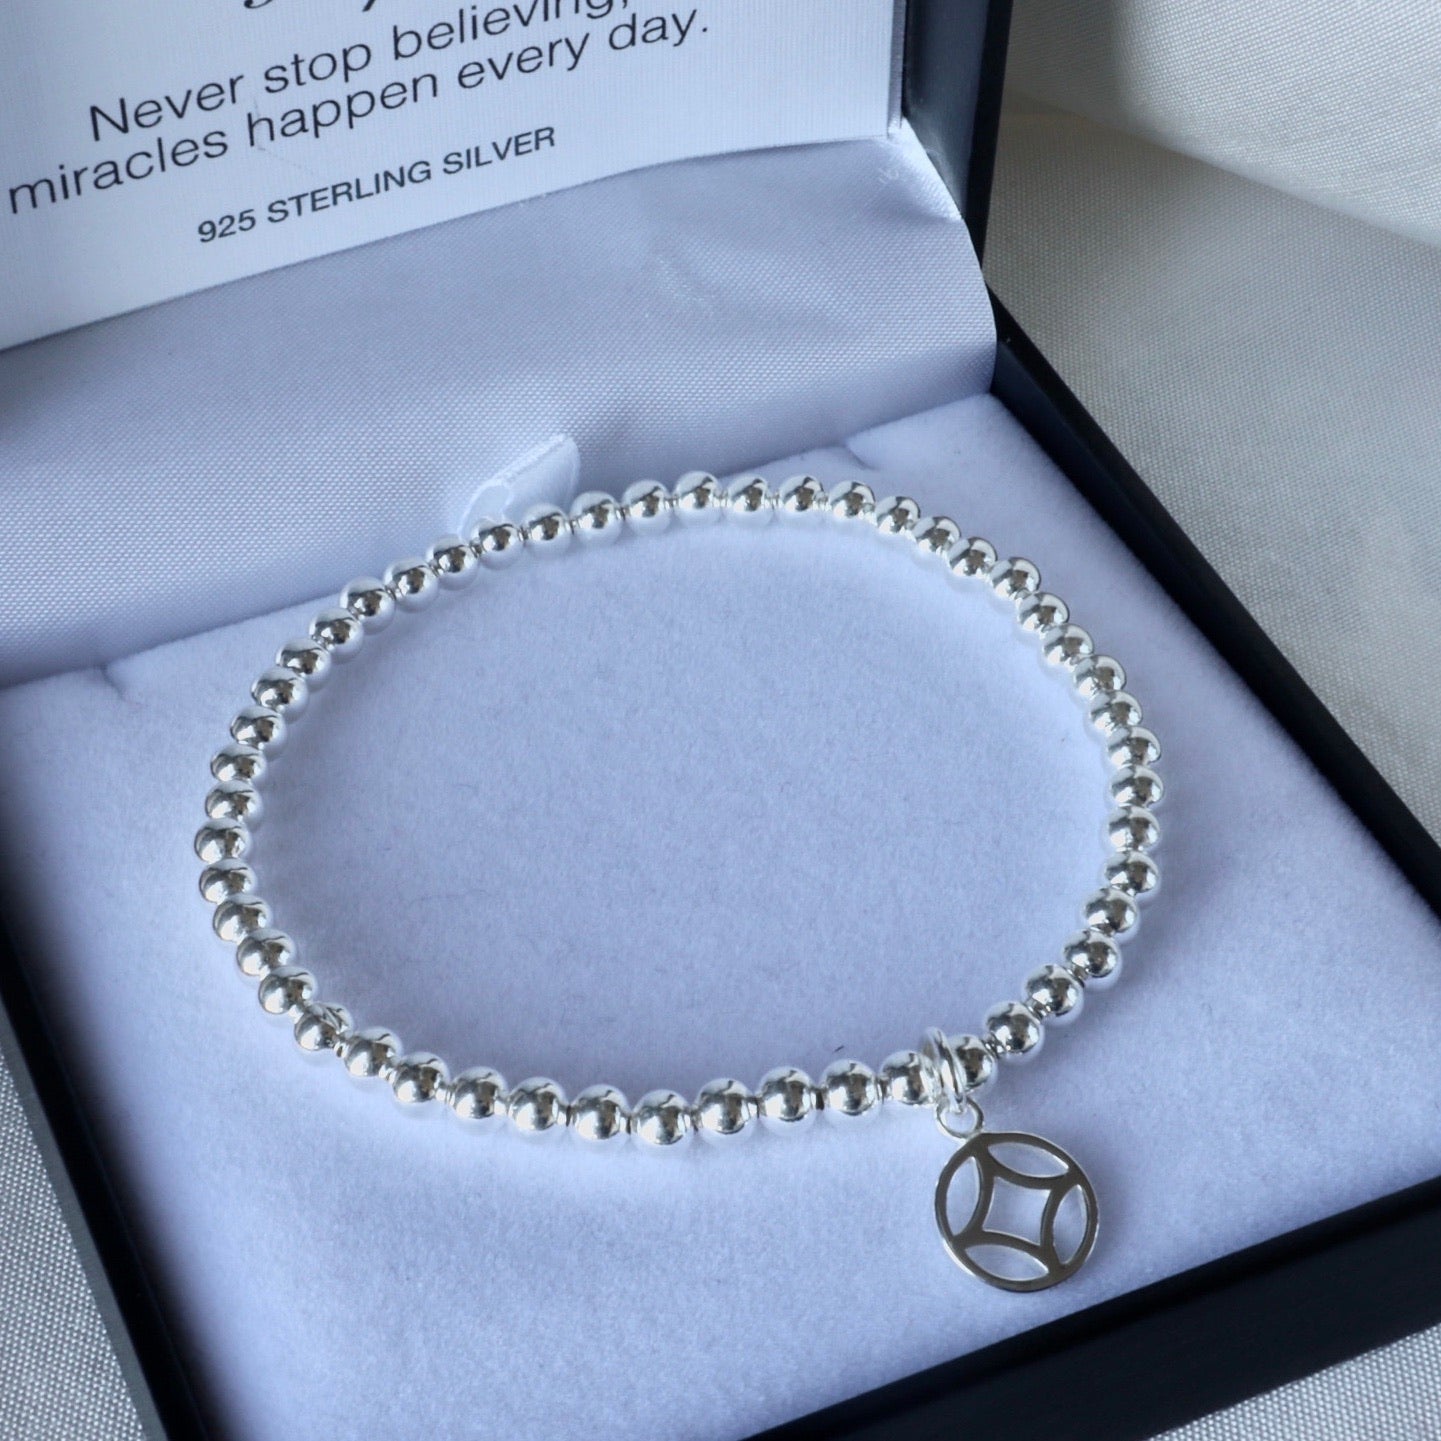 Miracle Sterling Silver Bracelet Stack